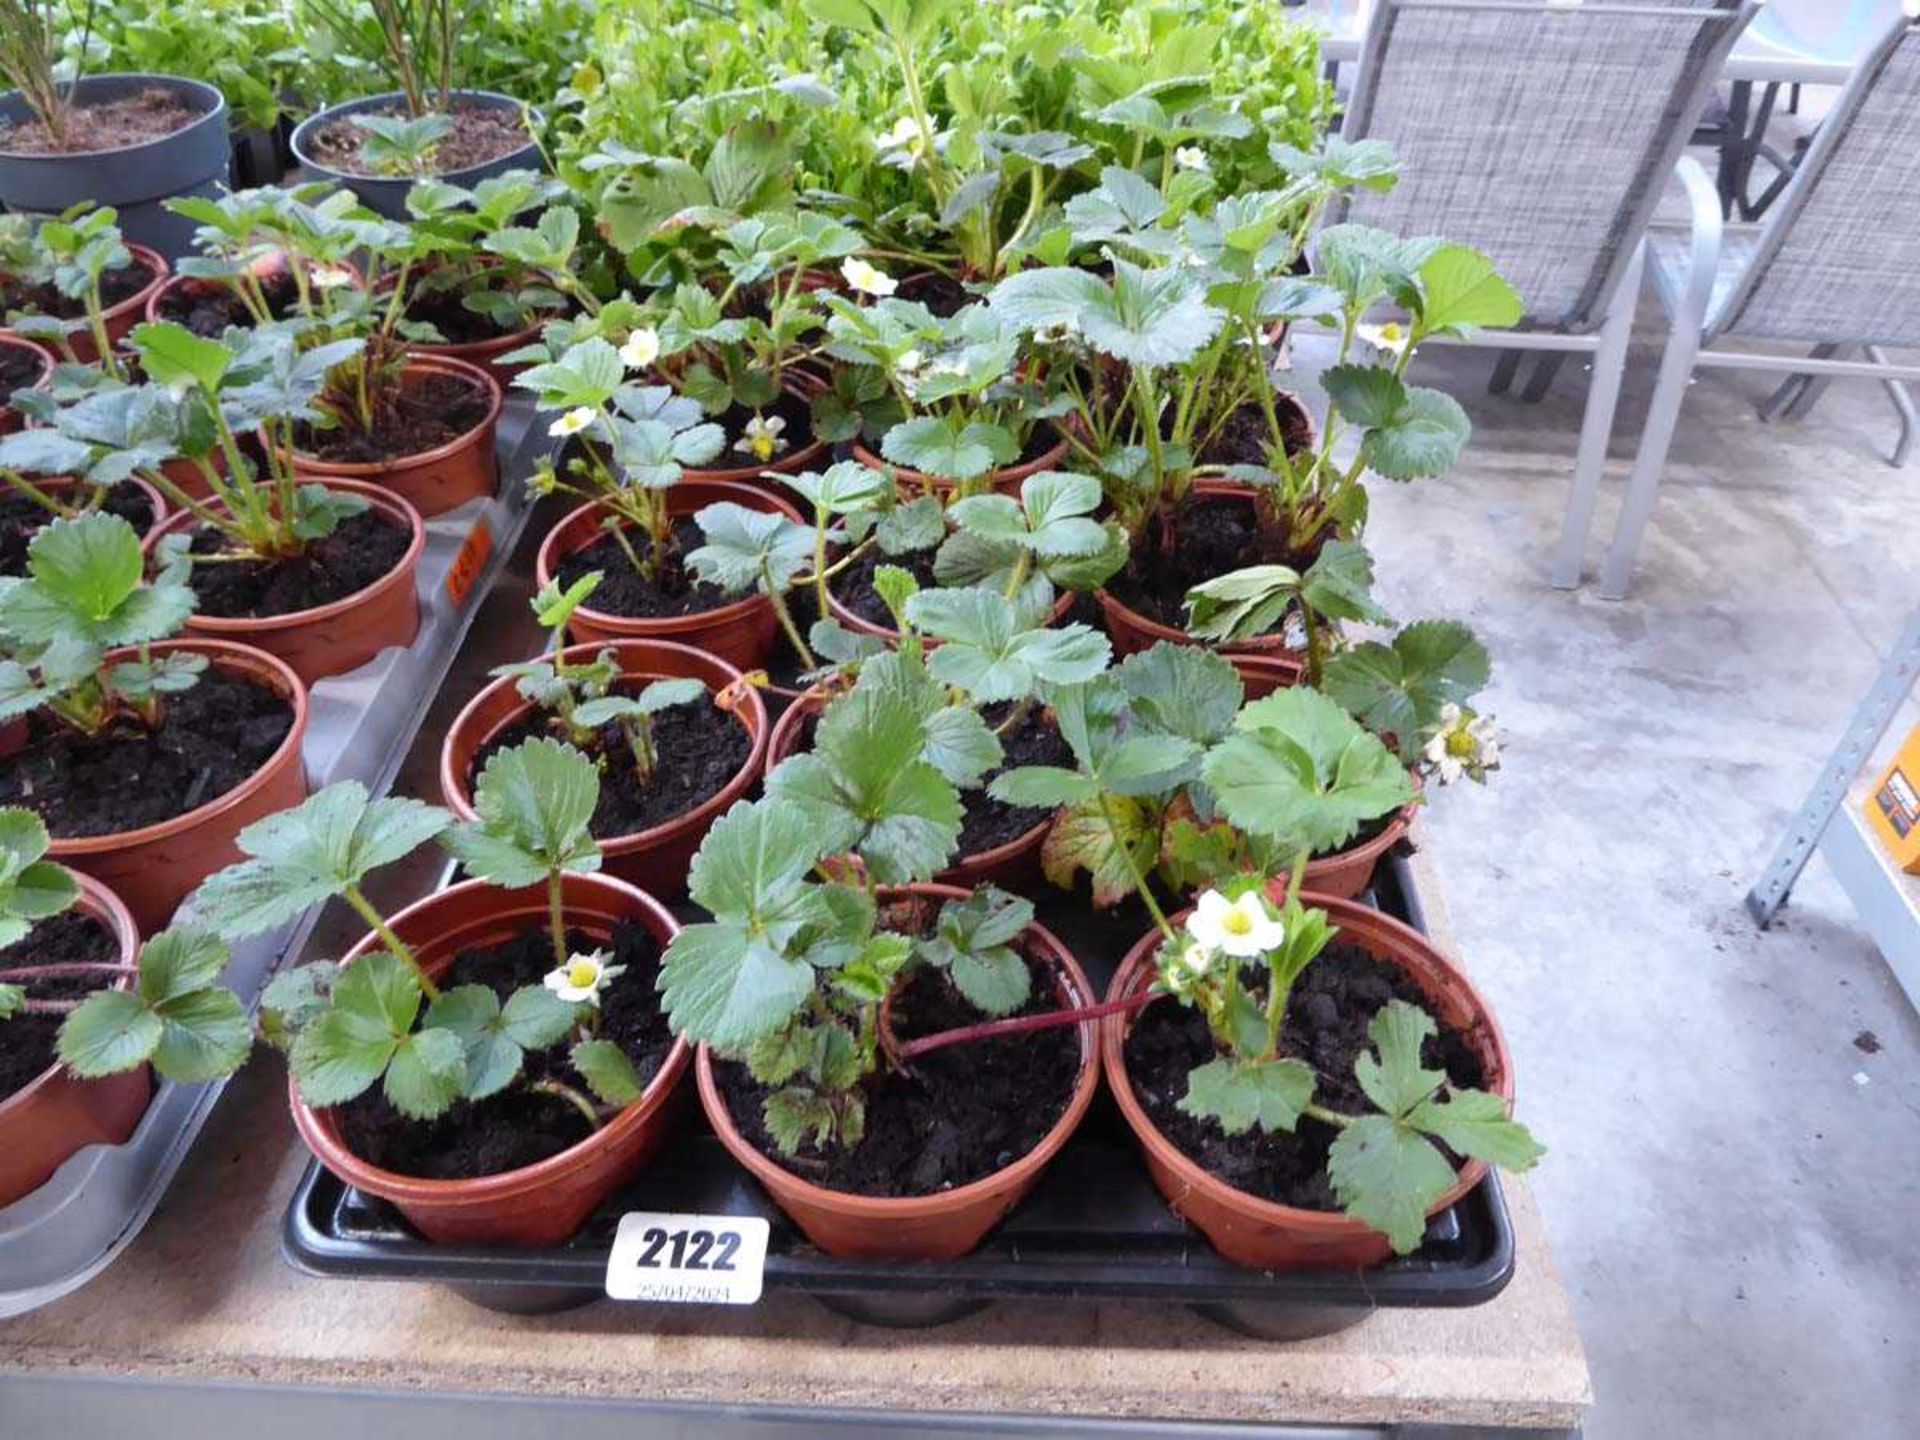 Tray containing 15 pots of strawberry plants